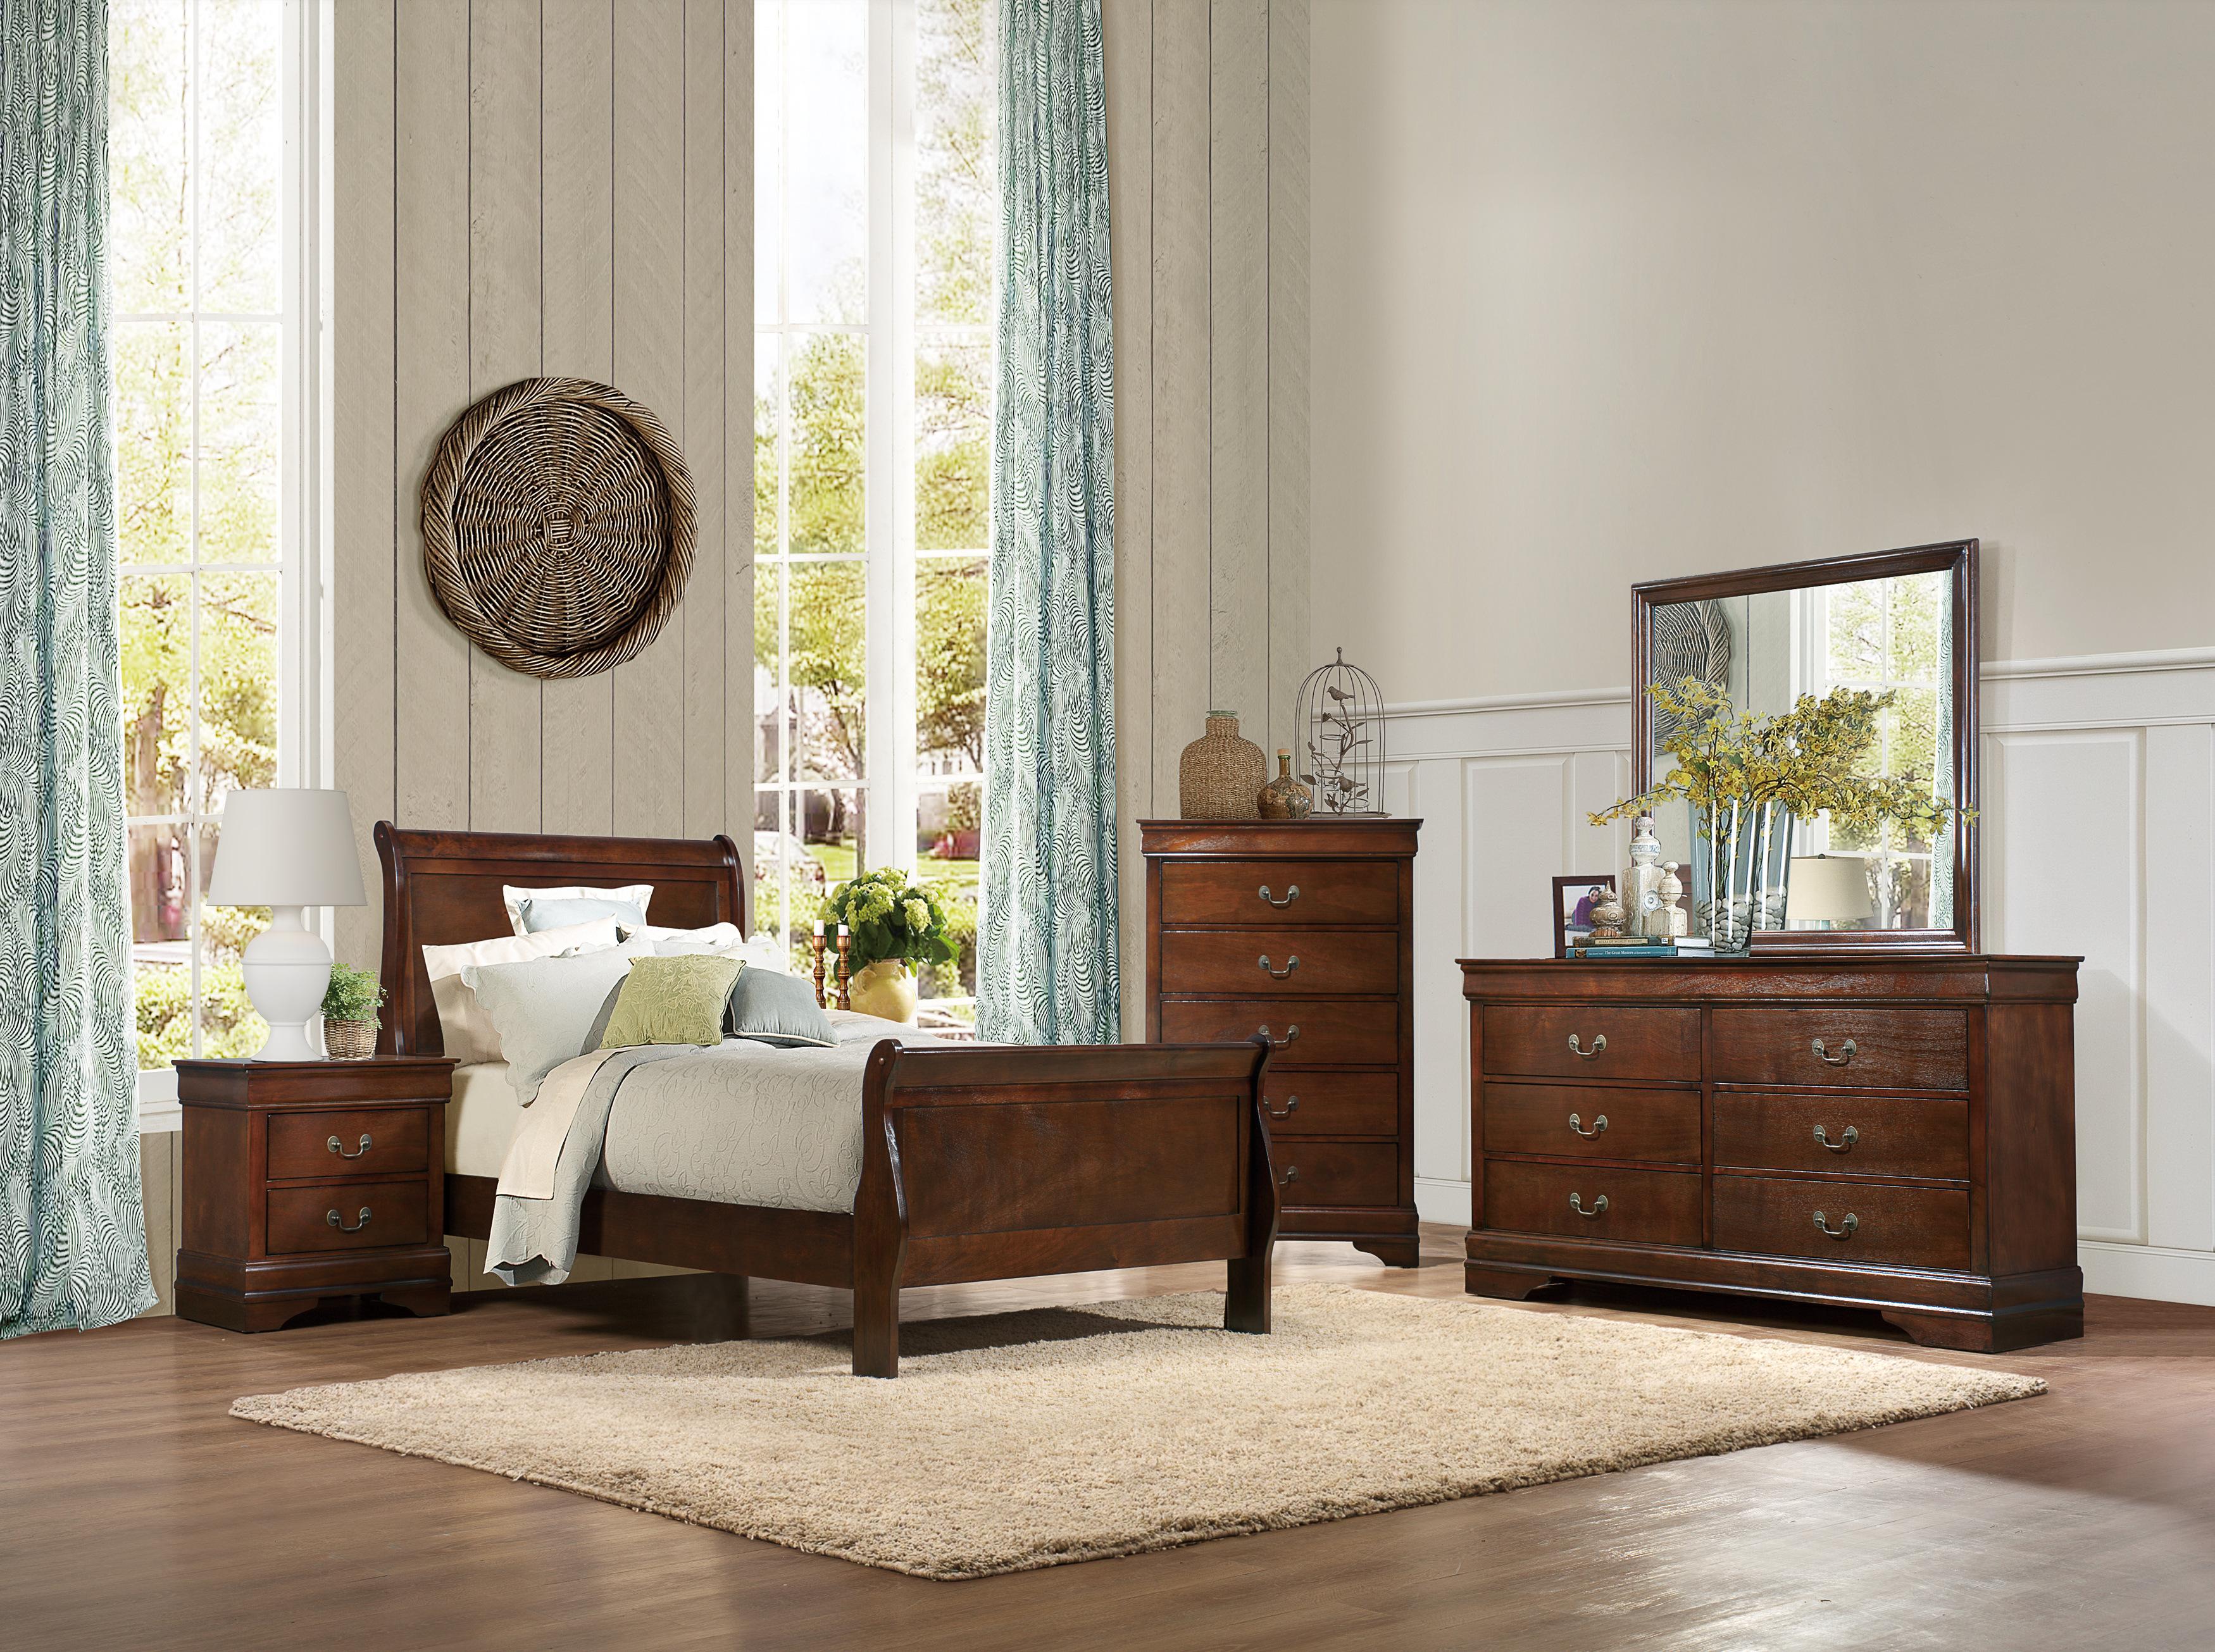 

    
Traditional Brown Cherry Wood Twin Bedroom Set 6pcs Homelegance 2147T-1* Mayville
